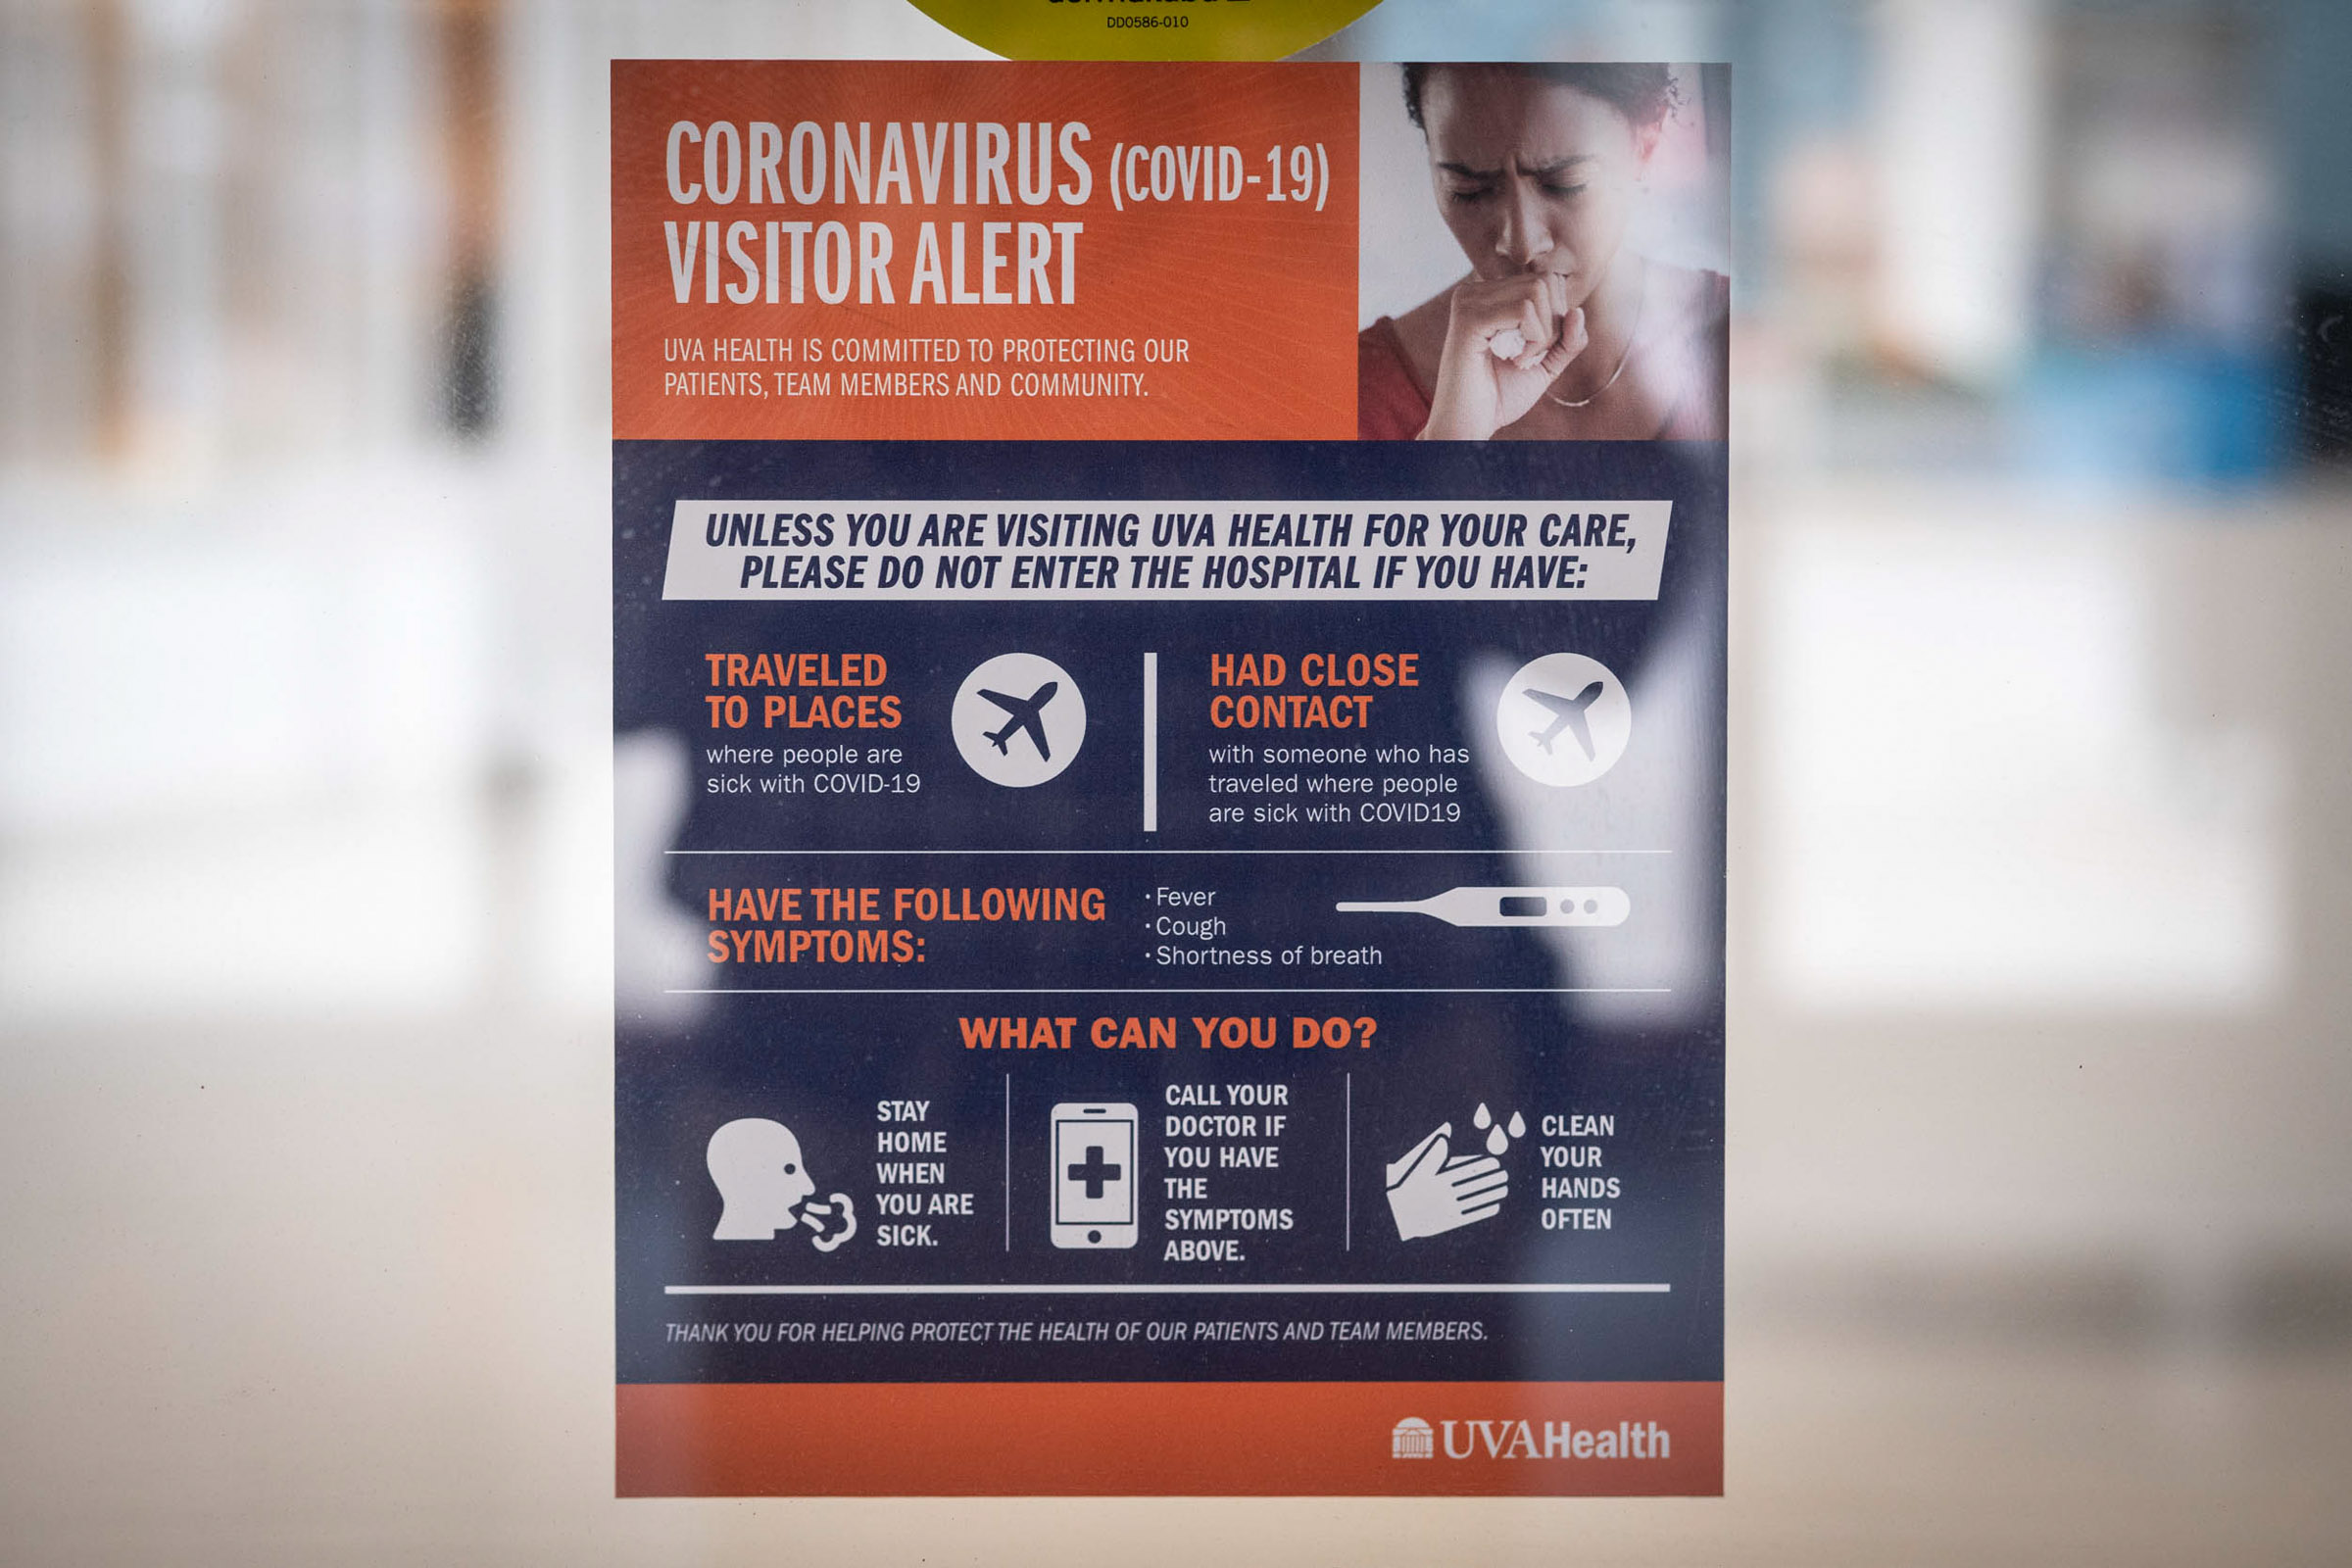 Coronavirus Visitor Alert poster taped to a glass wall